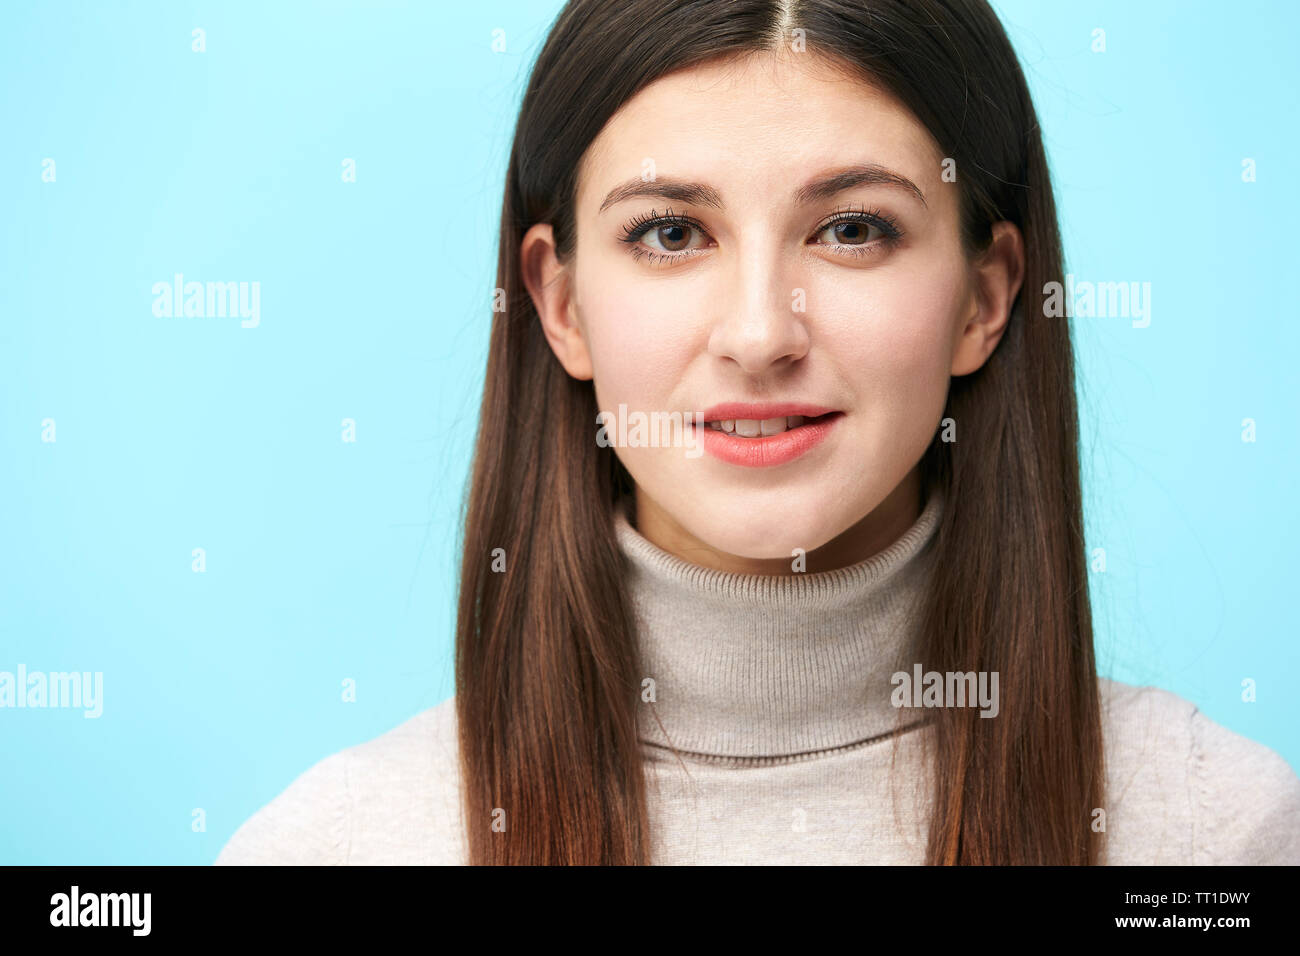 portrait of a beautiful young caucasian woman, head shot, looking at camera smiling, isolated on blue background Stock Photo